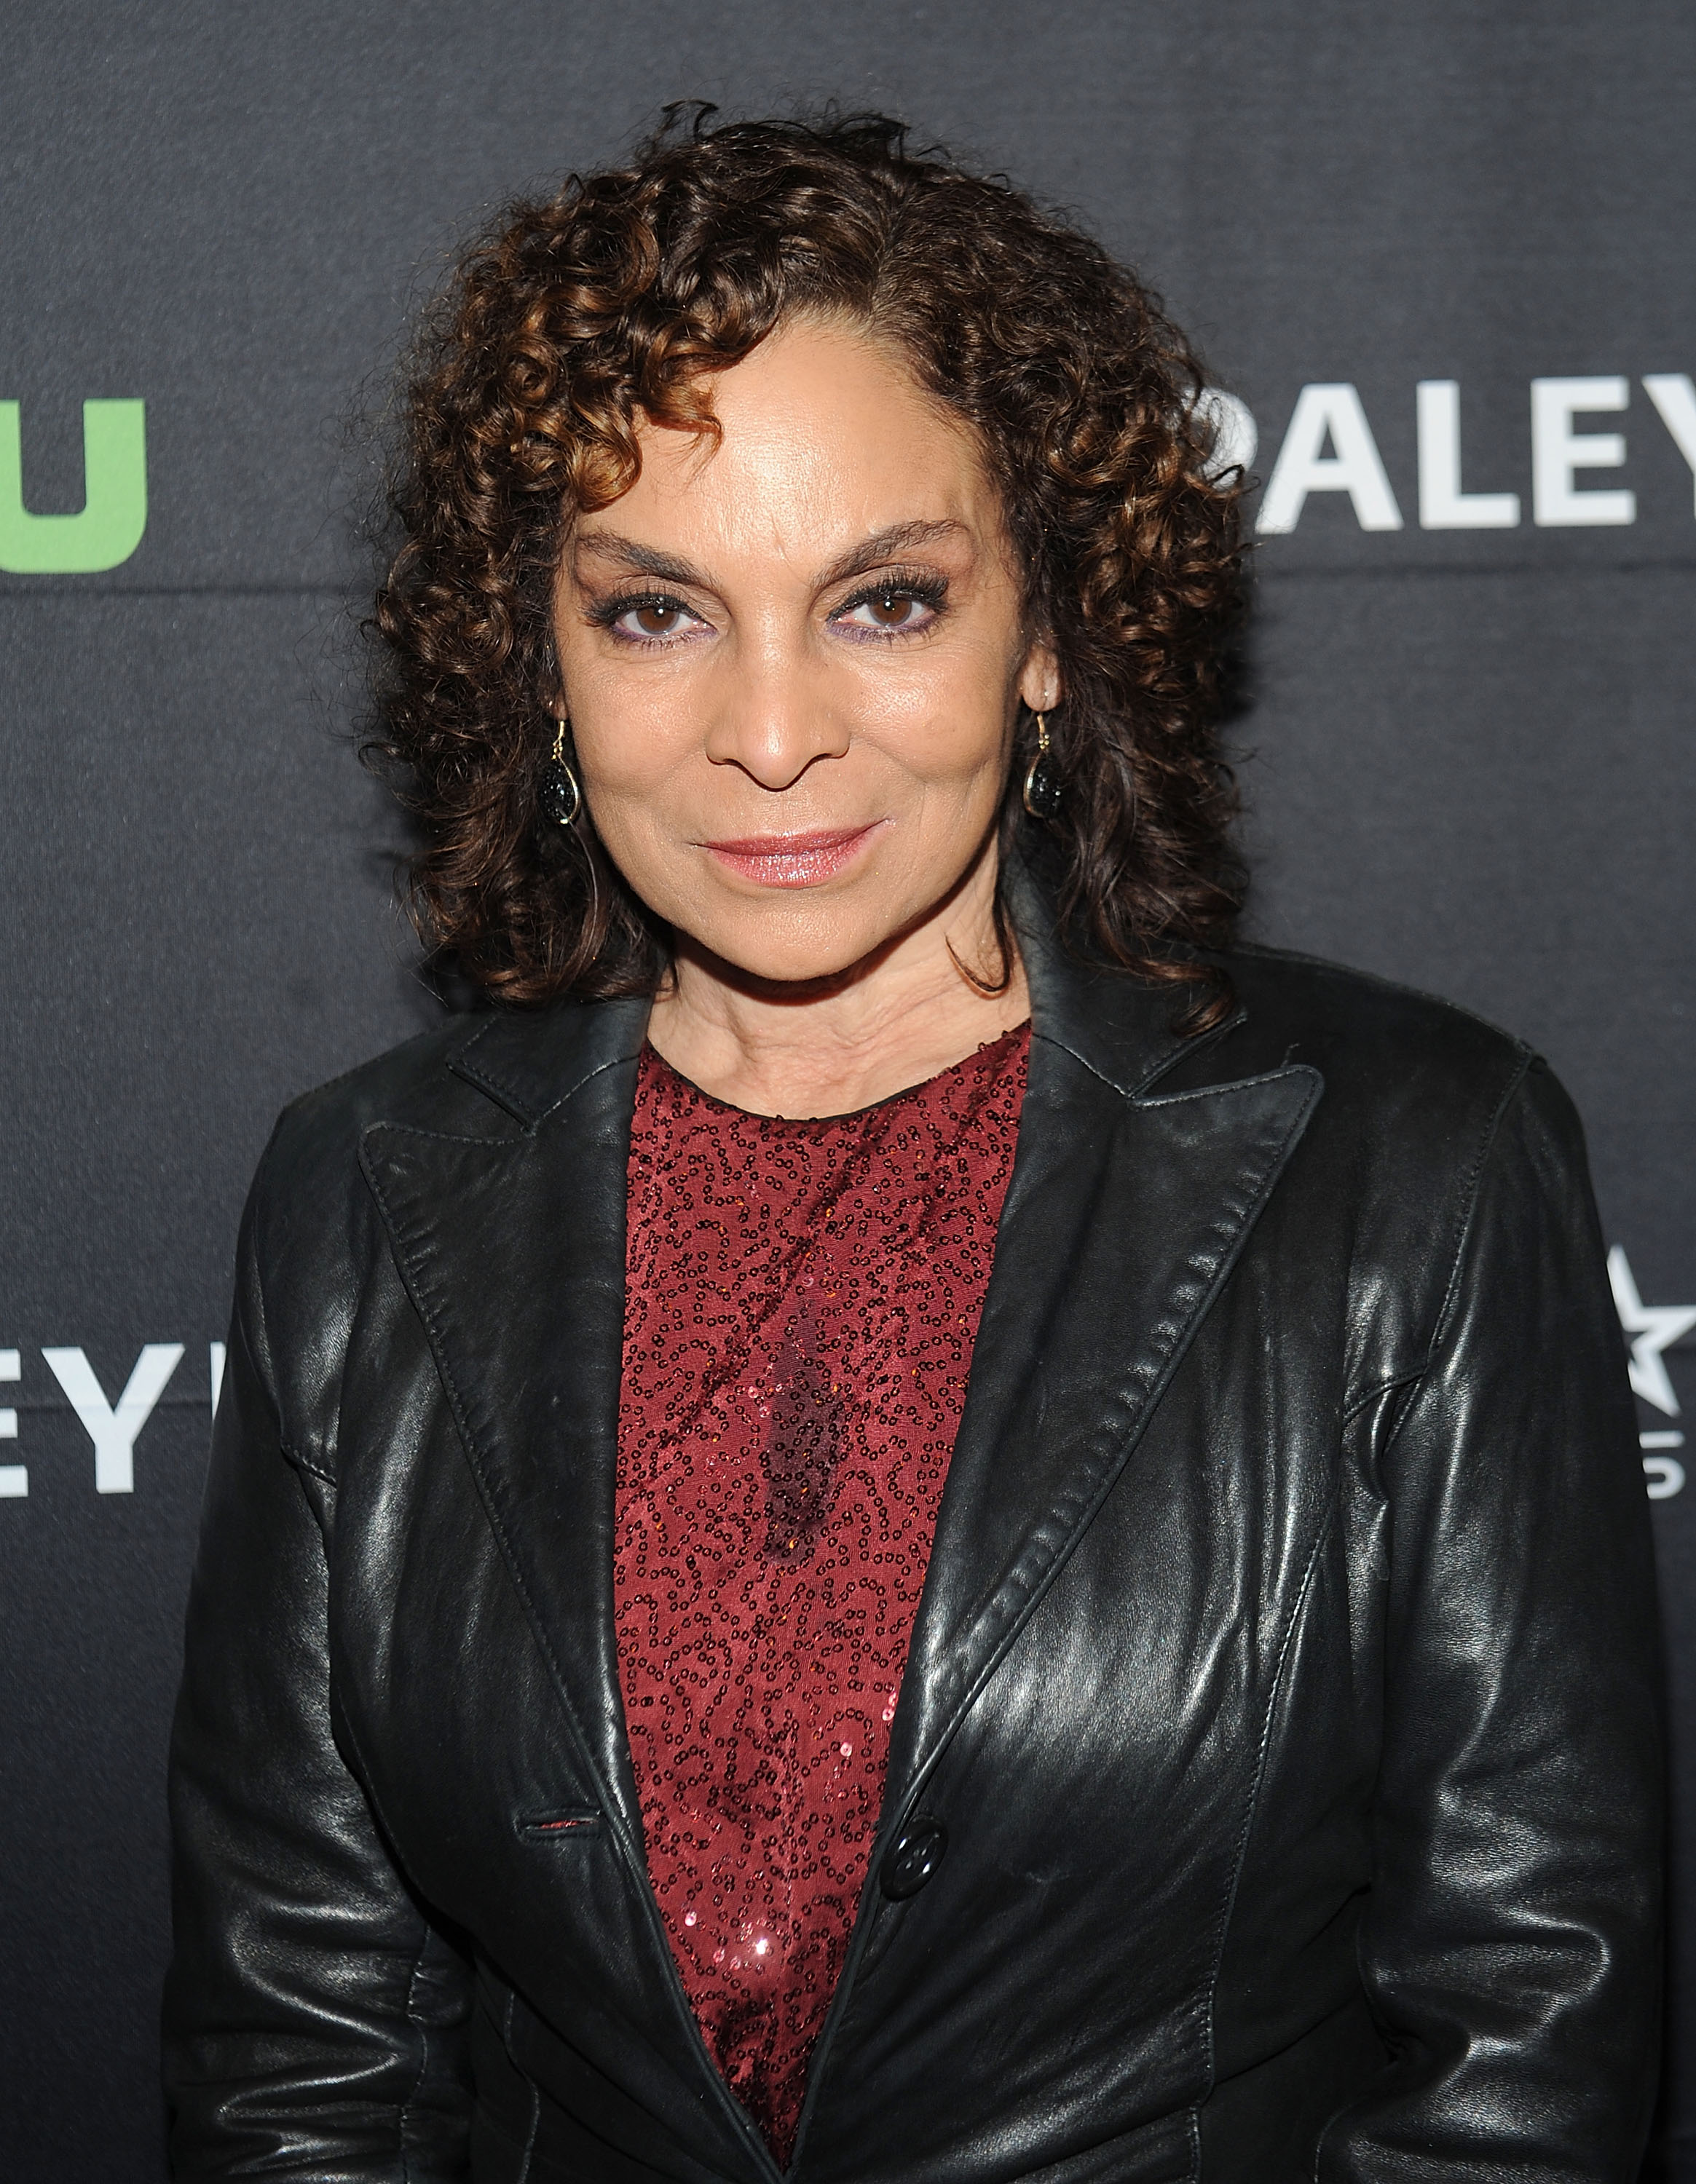 Jasmine Guy attends BET's "The Quad" world premiere at the Paley Center for Media on December 7, 2016 in New York City. | Source: Getty Images